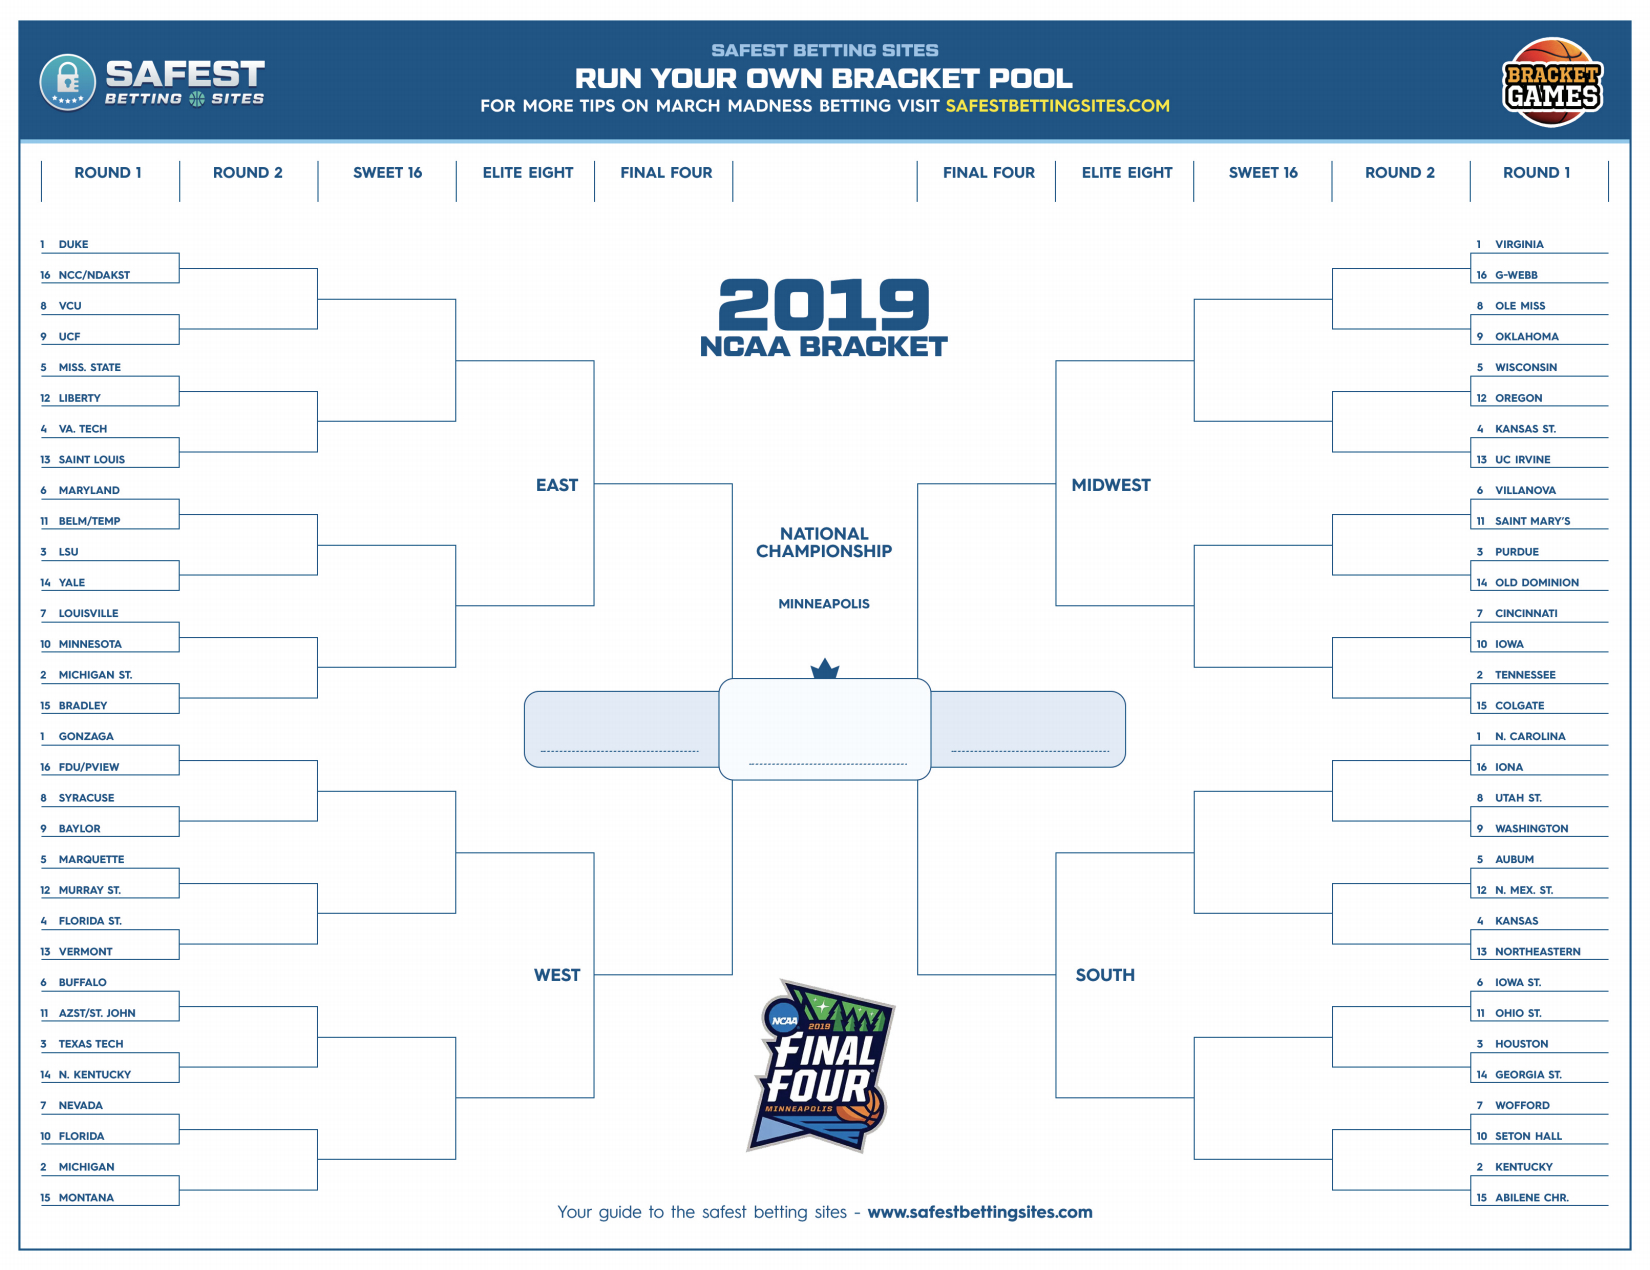 The Printable March Madness Bracket For The 2019 Ncaa Tournament Free